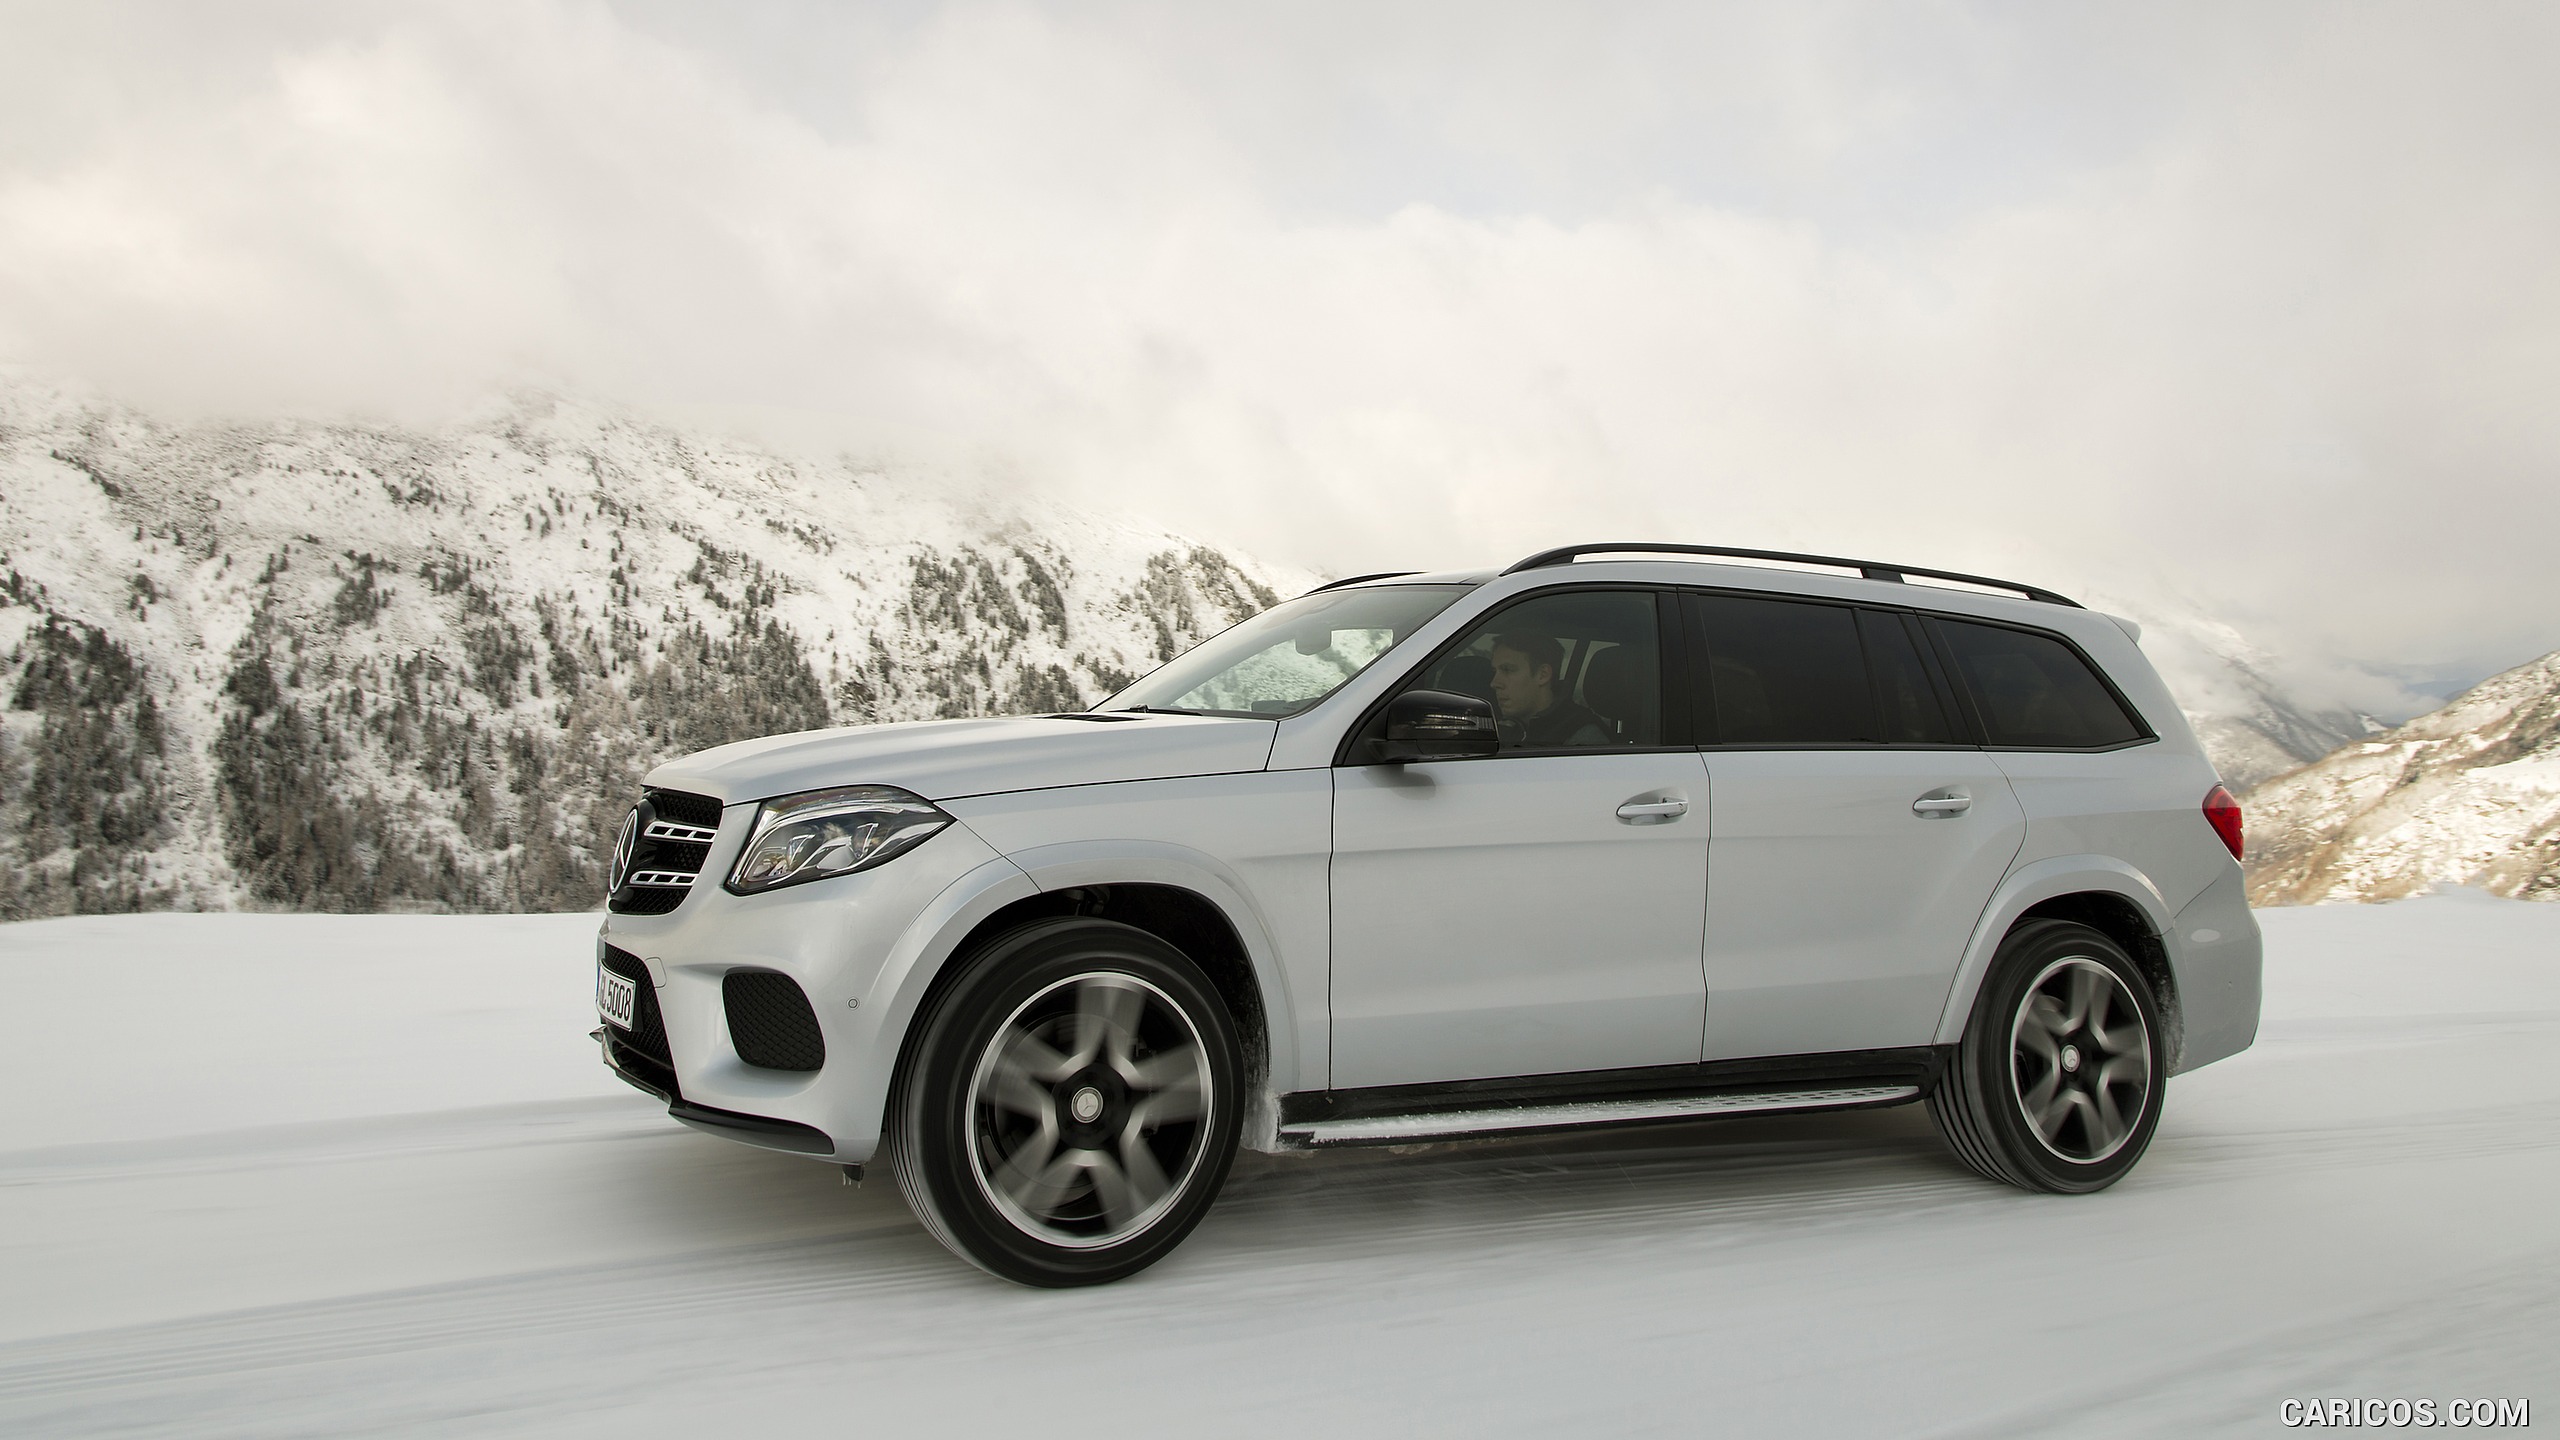 2017 Mercedes-Benz GLS 500 4MATIC AMG Line in Snow - Side, #130 of 255